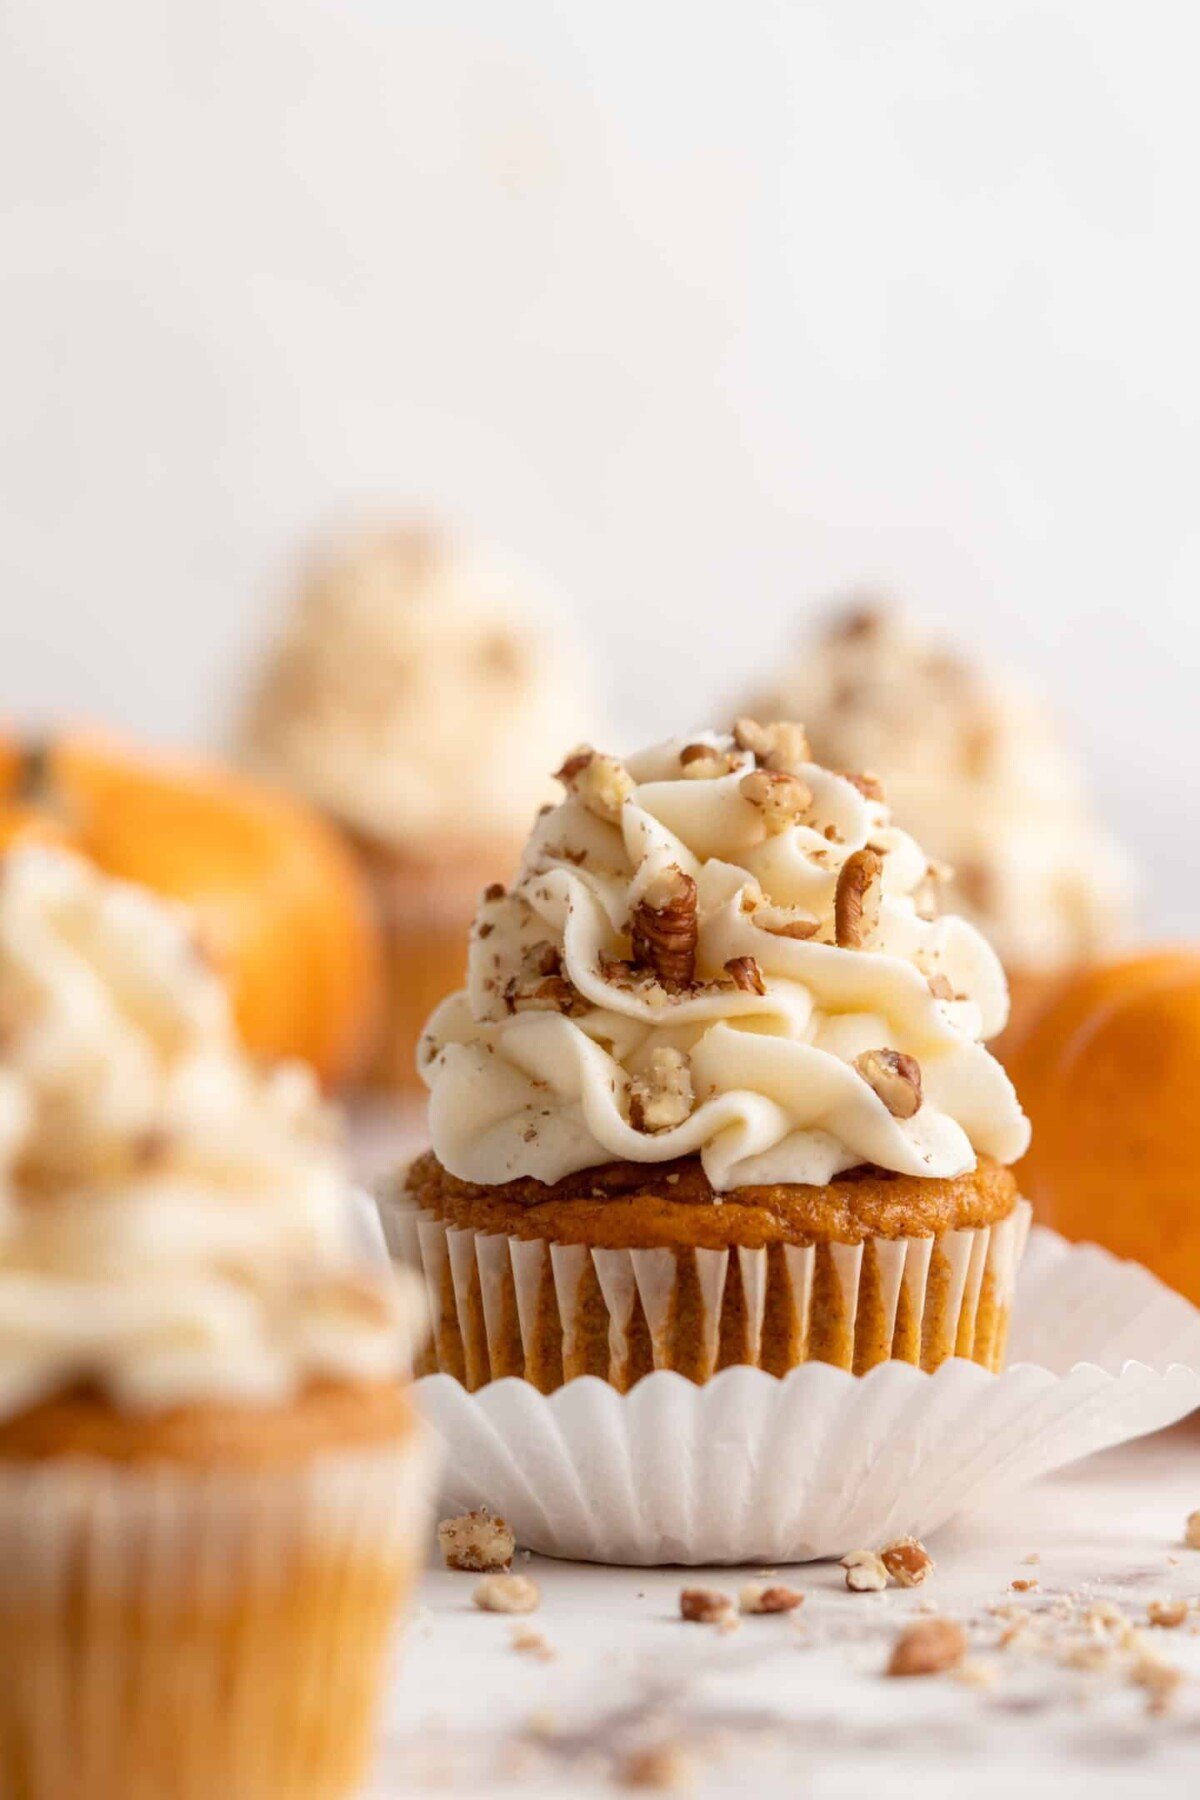 Close up of a pumpkin cupcake topped with cream cheese frosting and pecans, with more cupcakes and pumpkins in the background, and a cupcake in the foreground